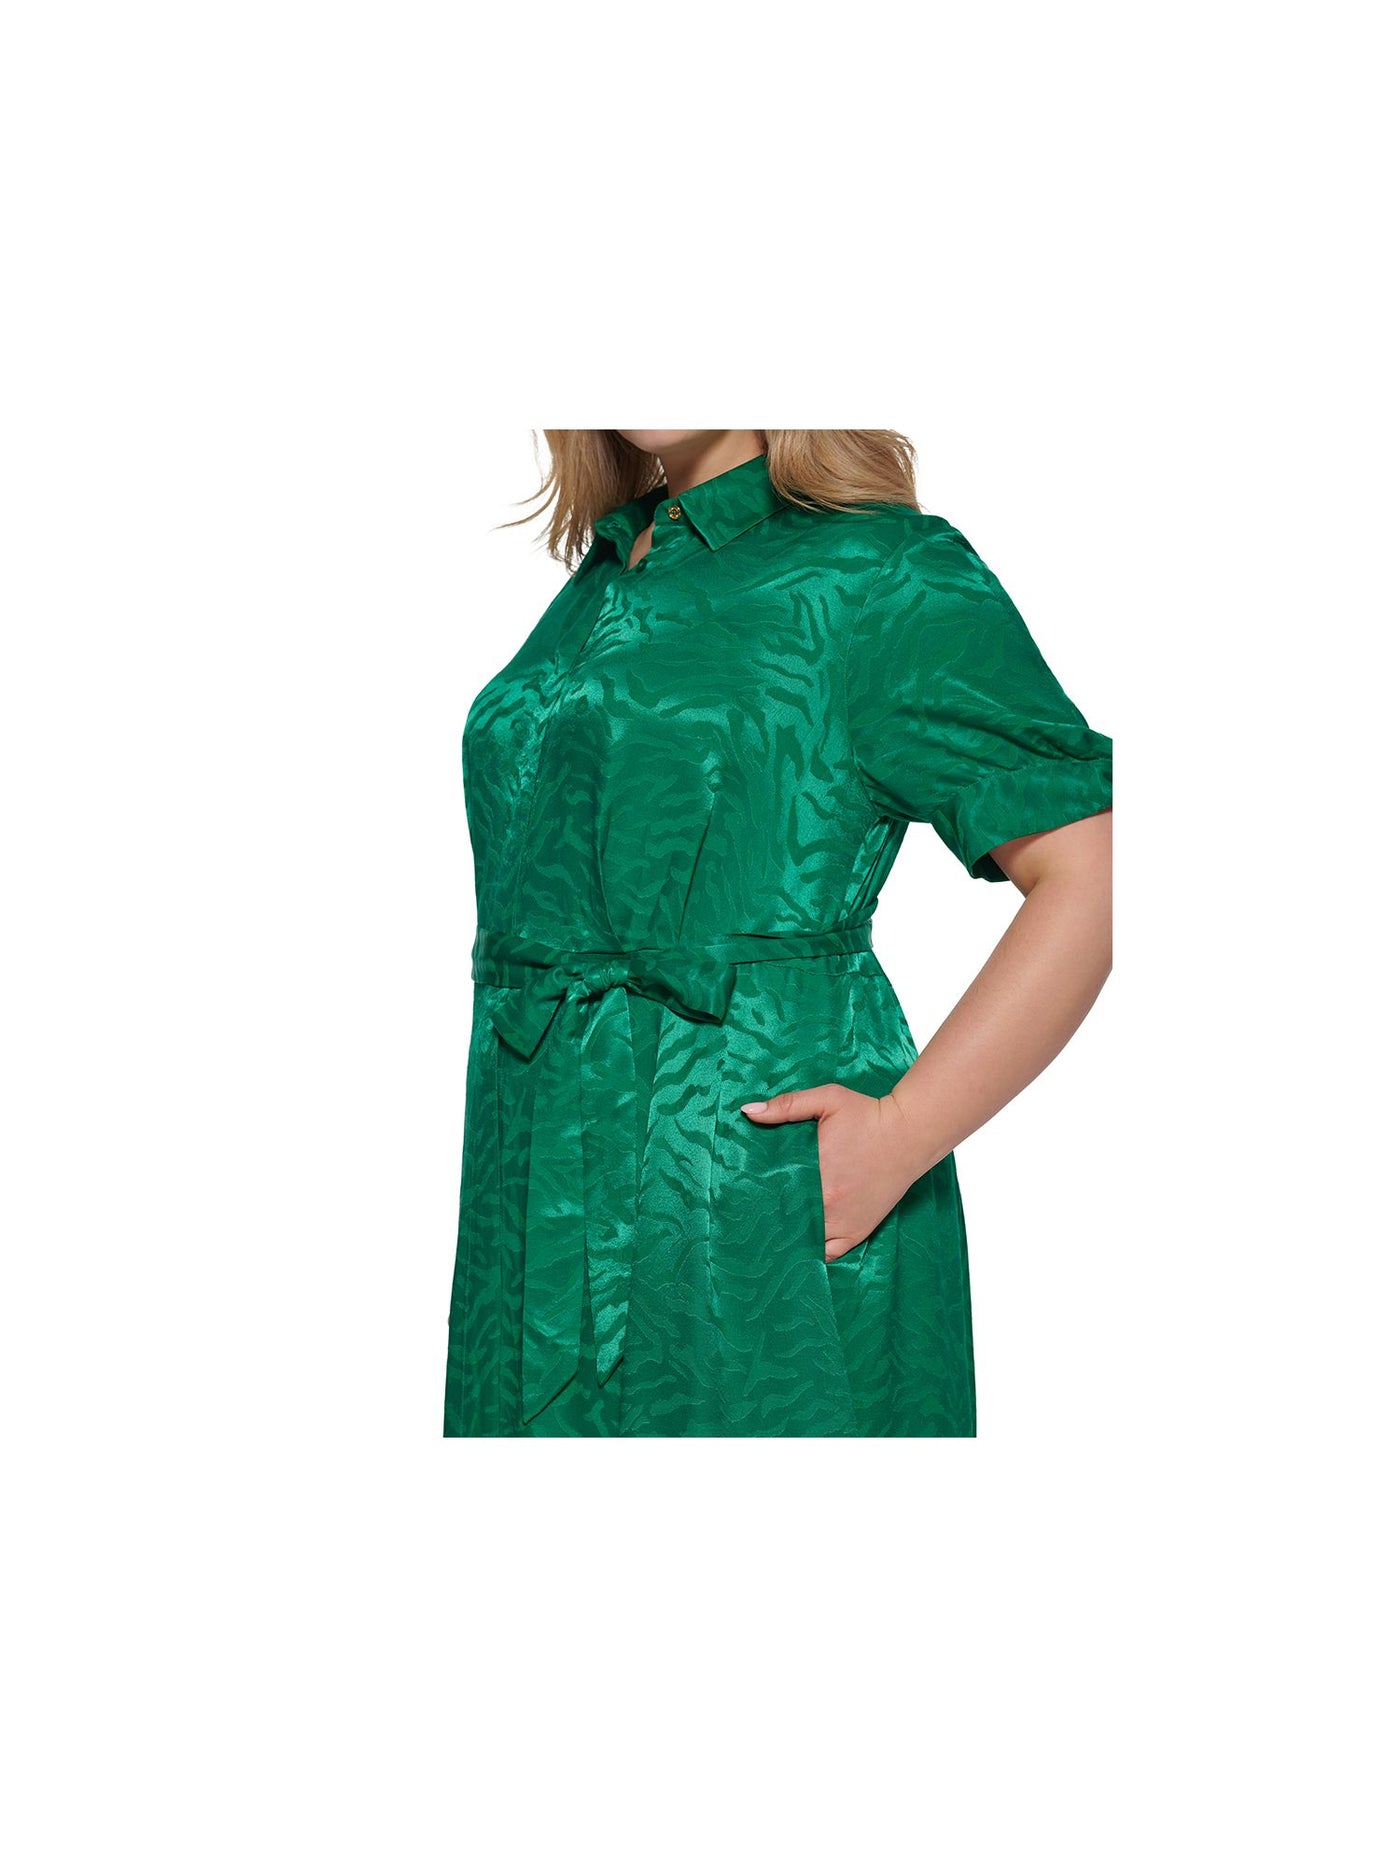 CALVIN KLEIN Womens Green Belted Button Down Short Sleeve Collared Midi Shift Dress Plus 22W